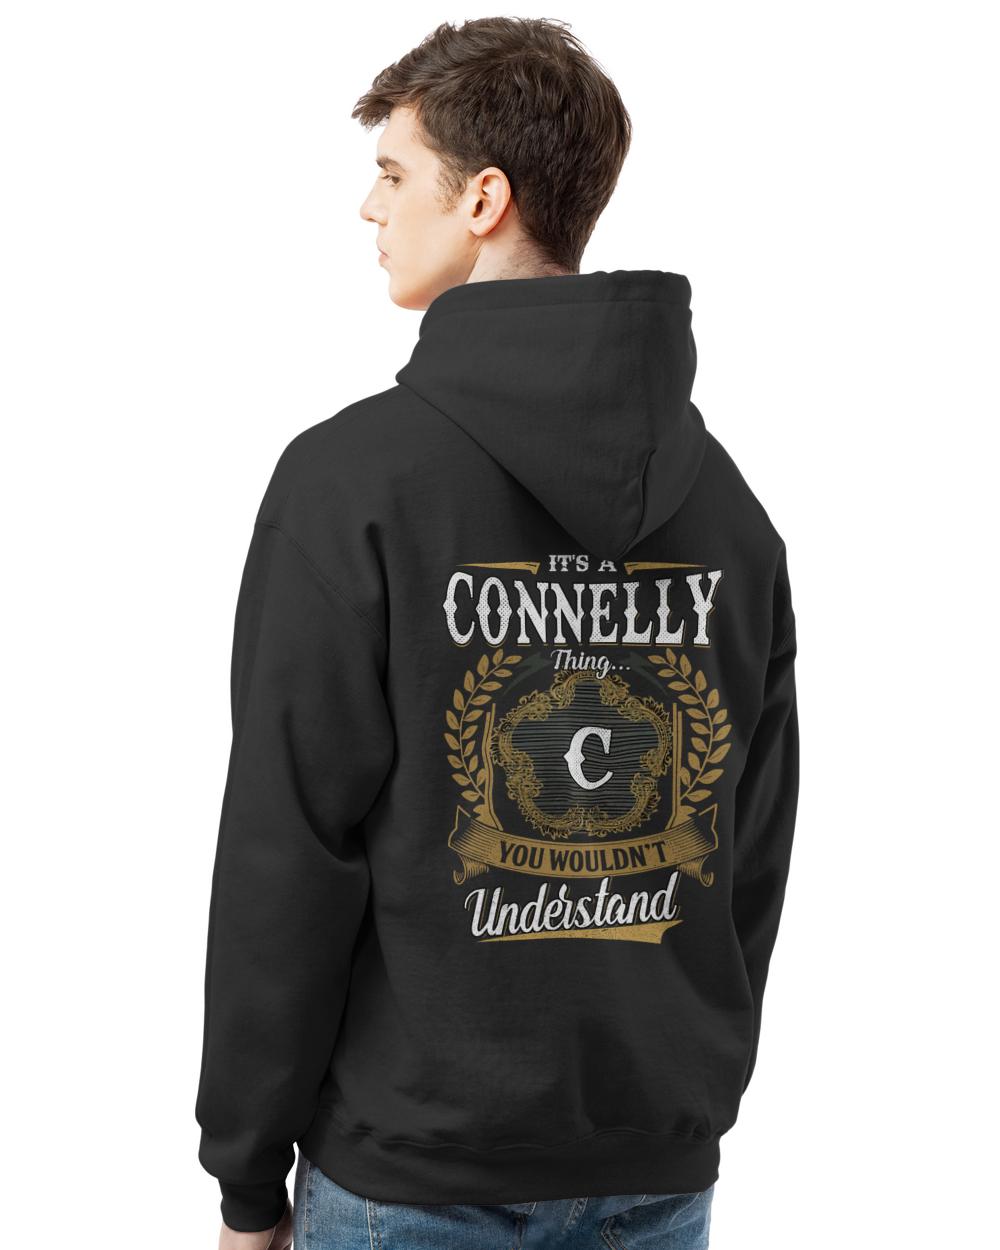 CONNELLY-13K-1-01